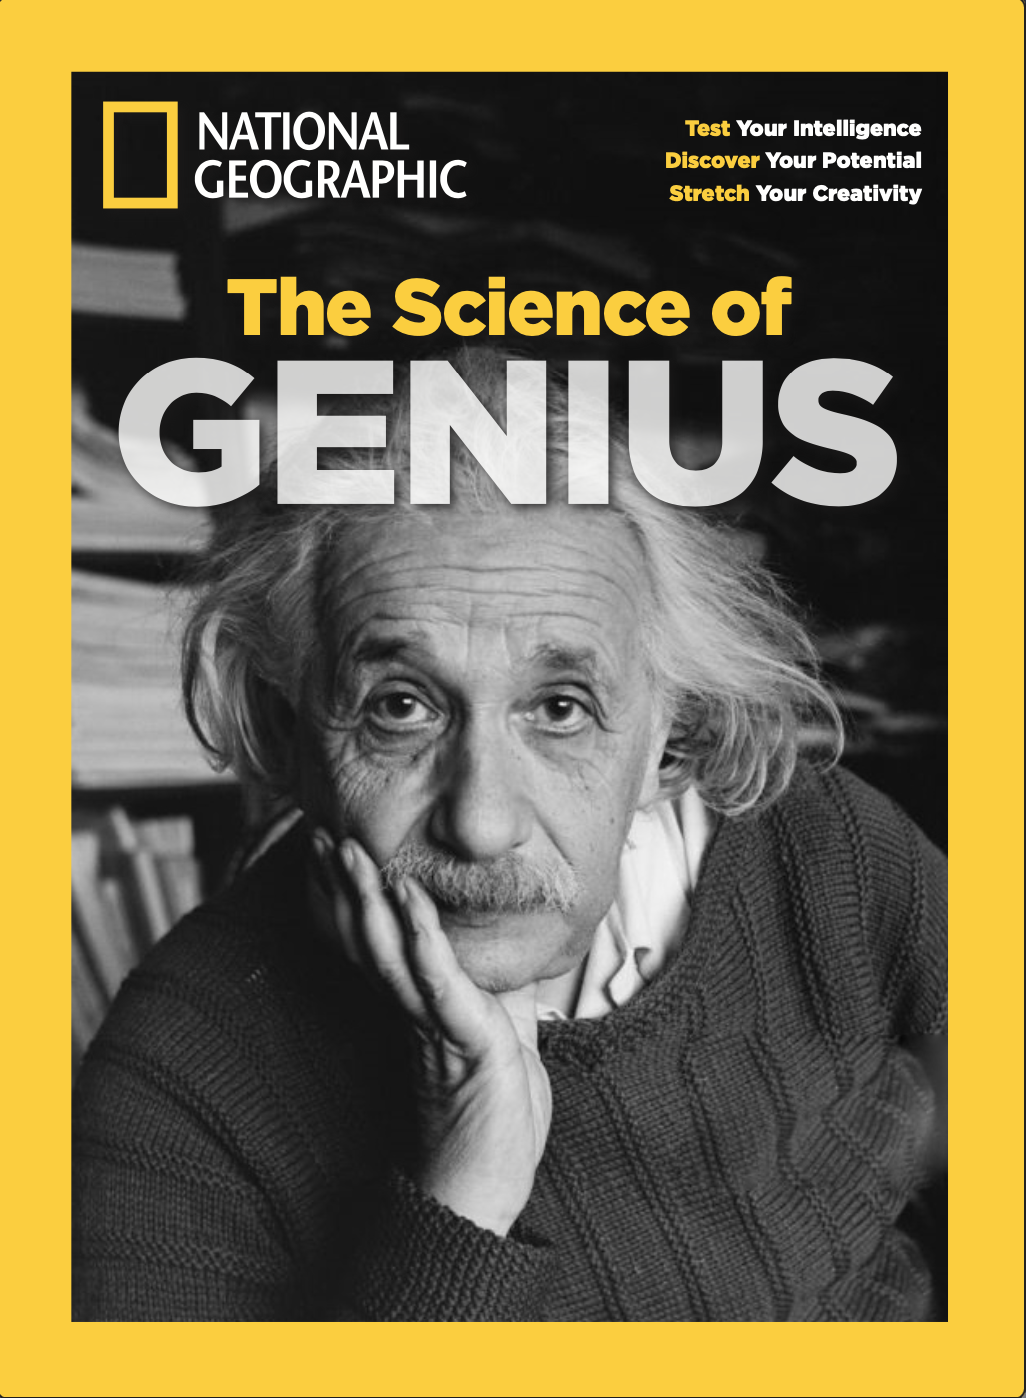 Image from NAT GEO SPECIAL EDITION COVERS